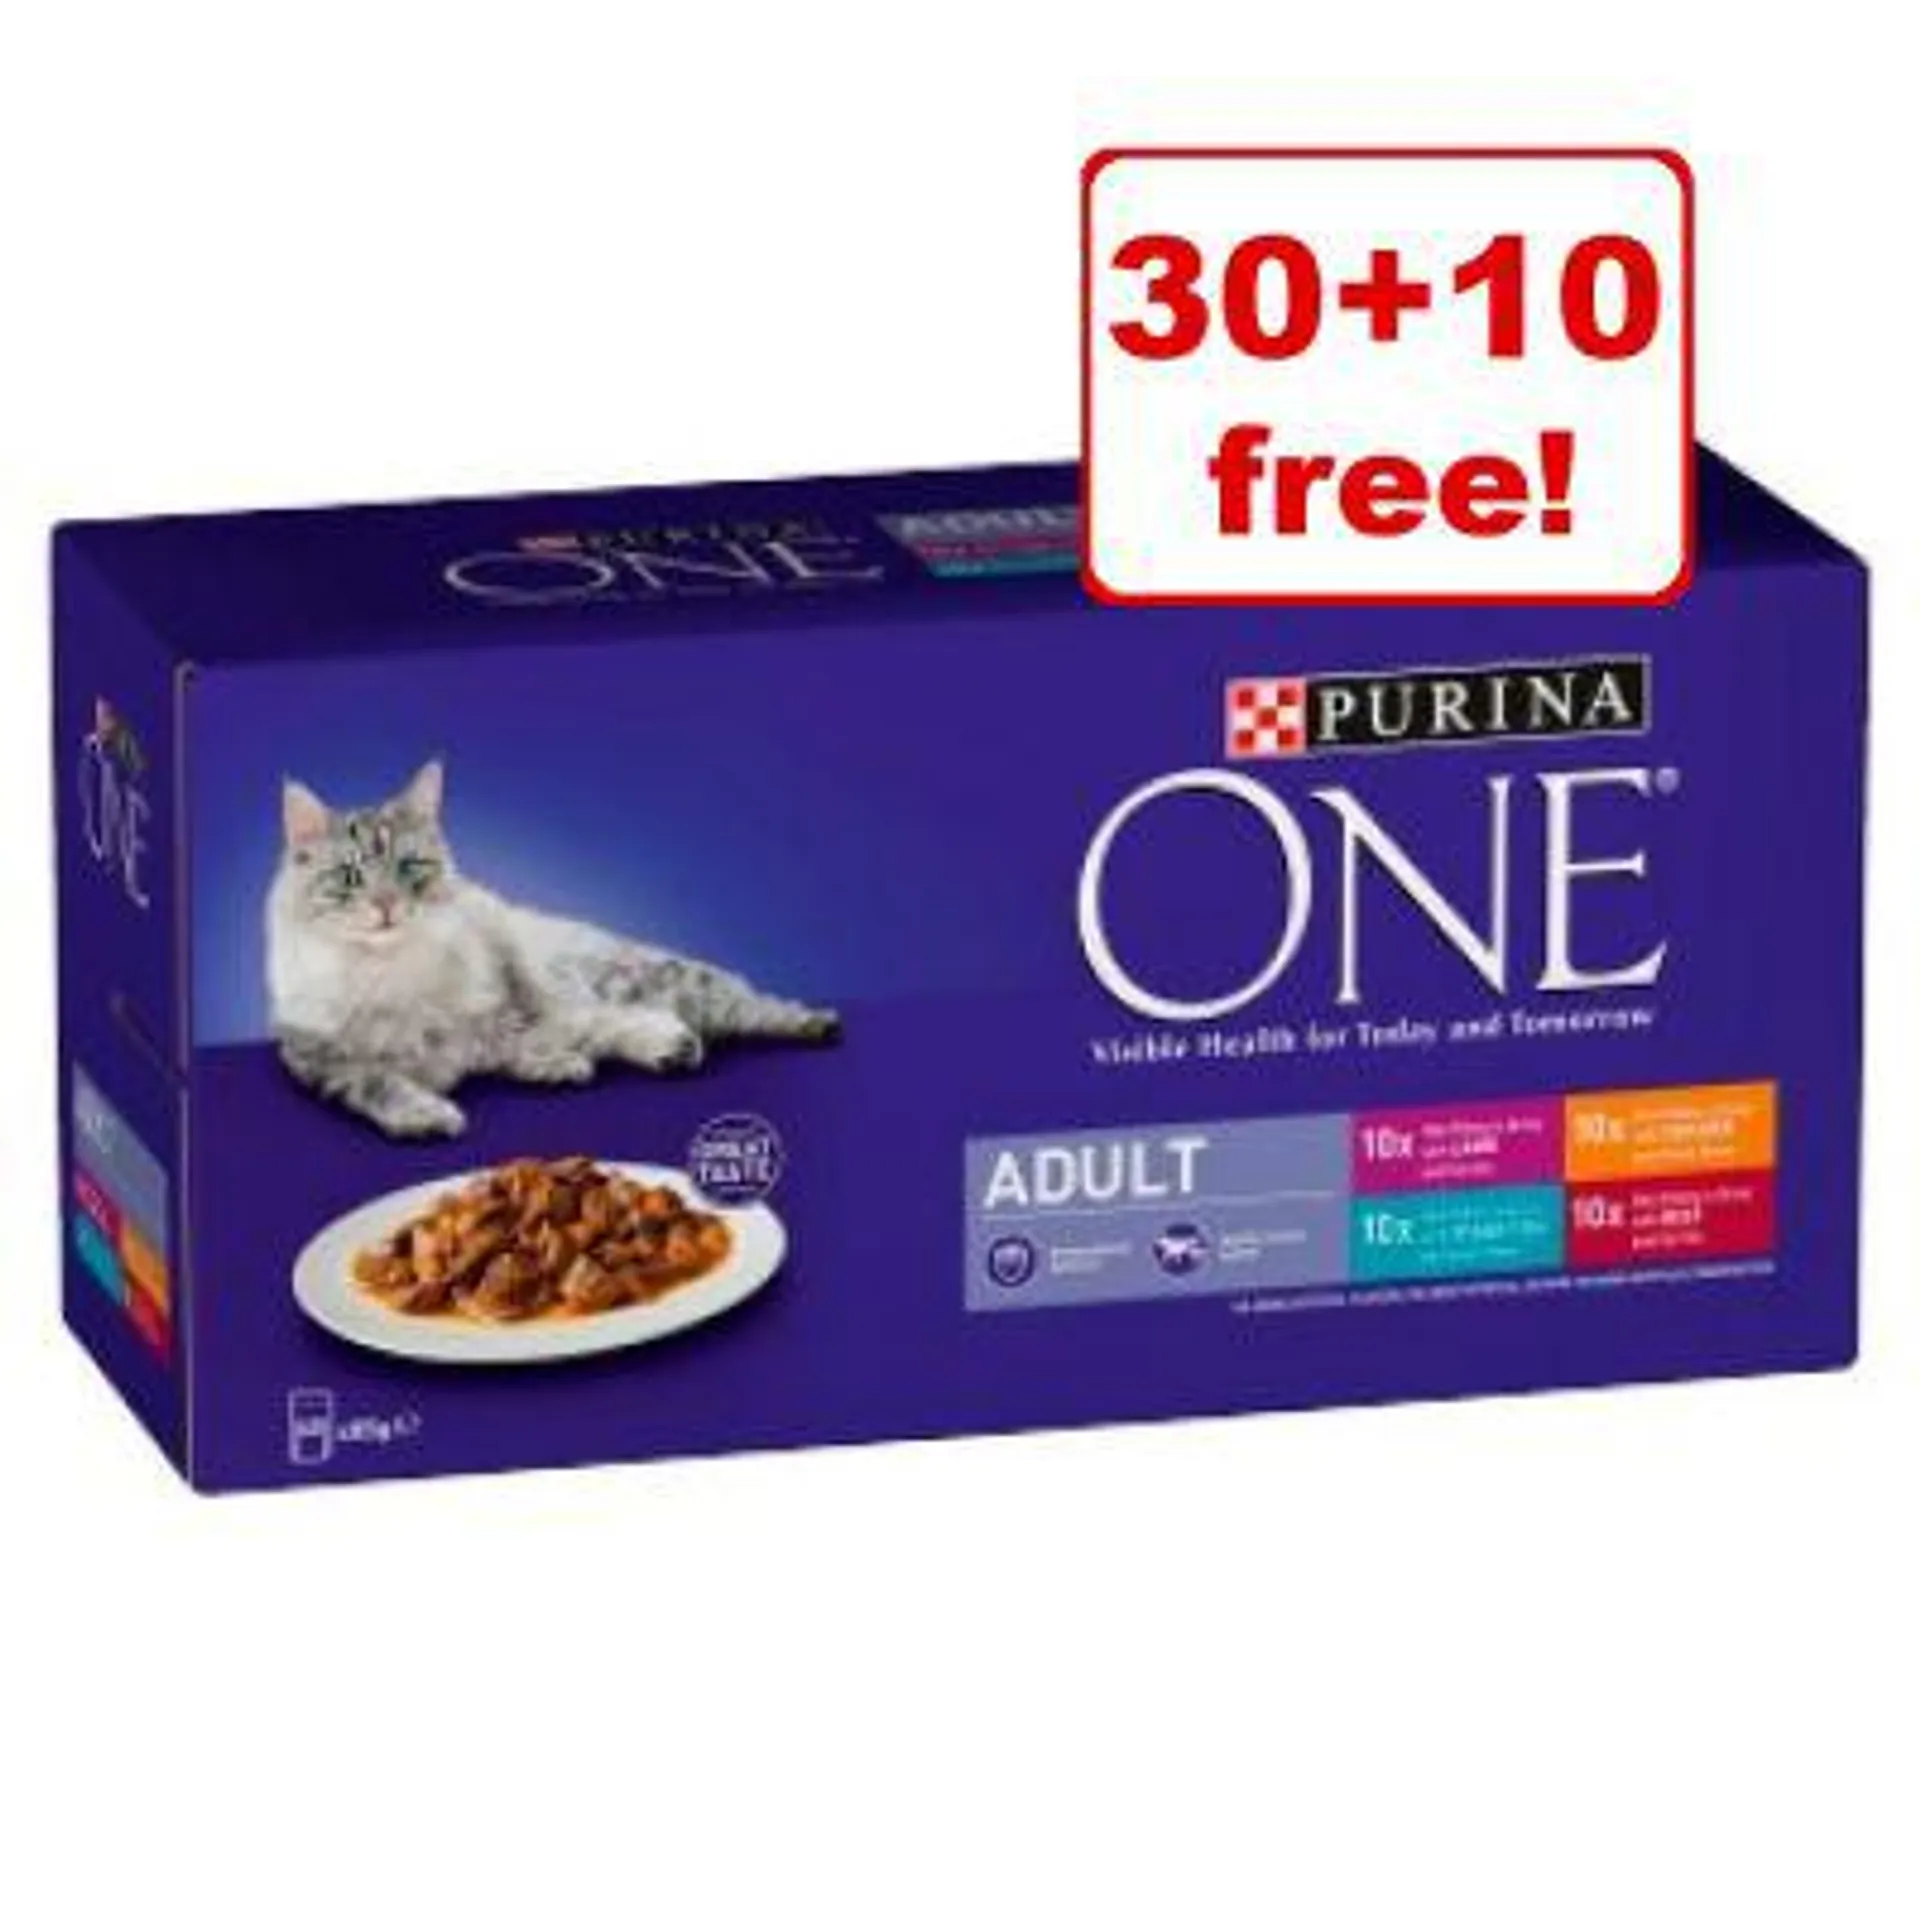 40 x 85g Purina ONE Adult Wet Cat Food - 30 + 10 Free!*